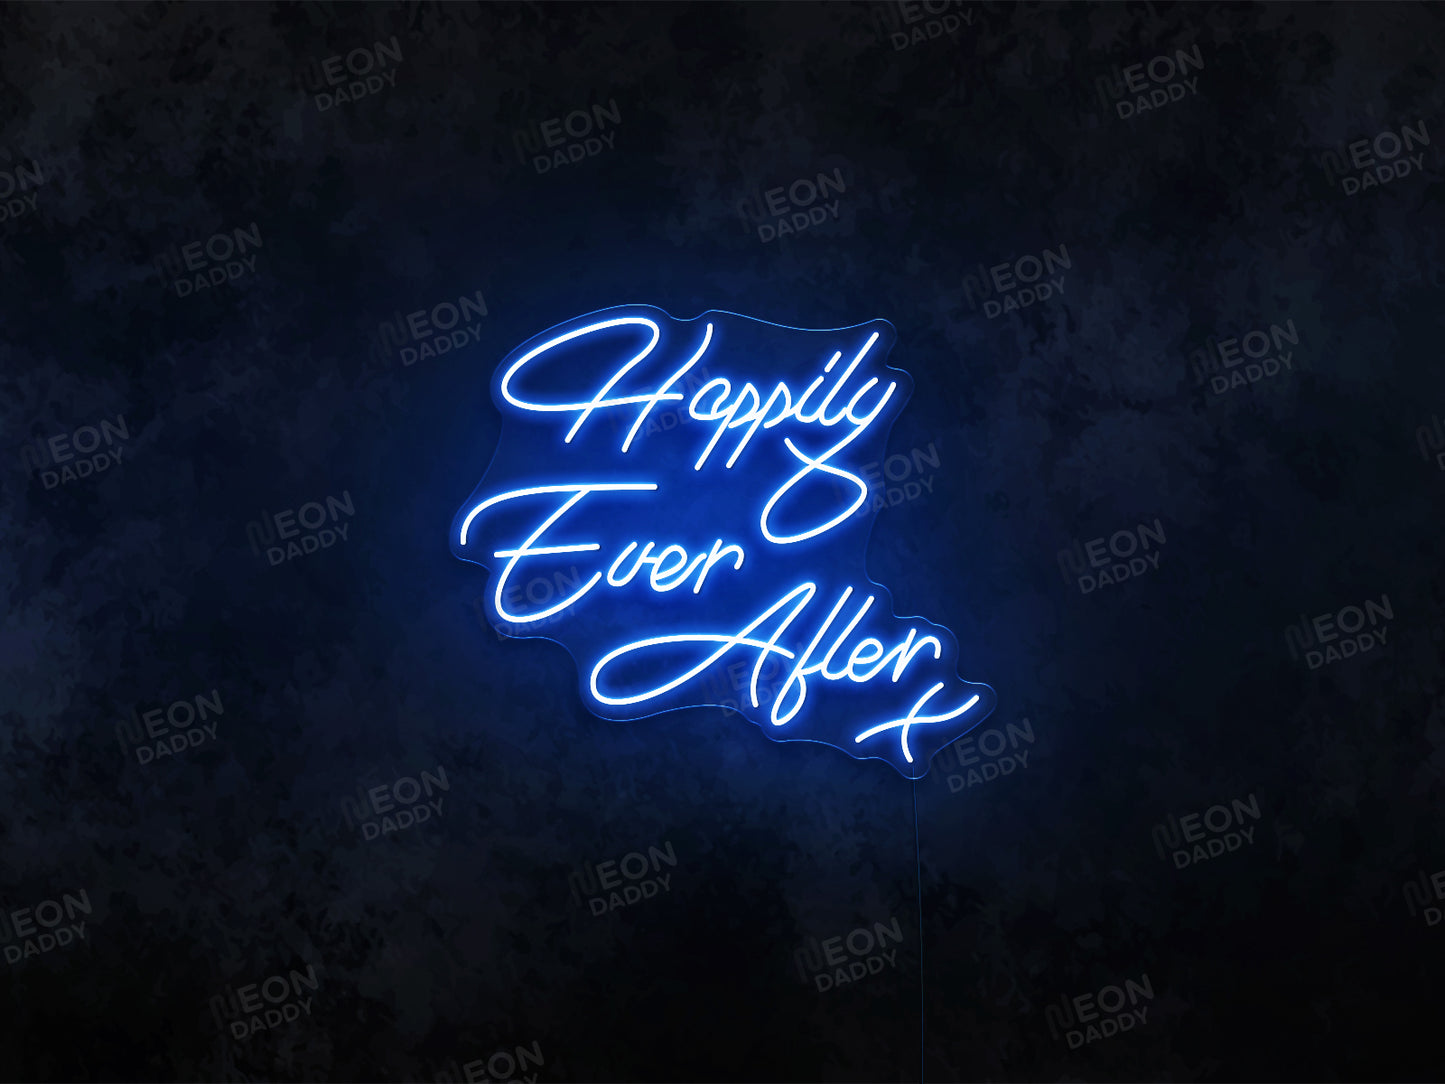 Happily Ever After x